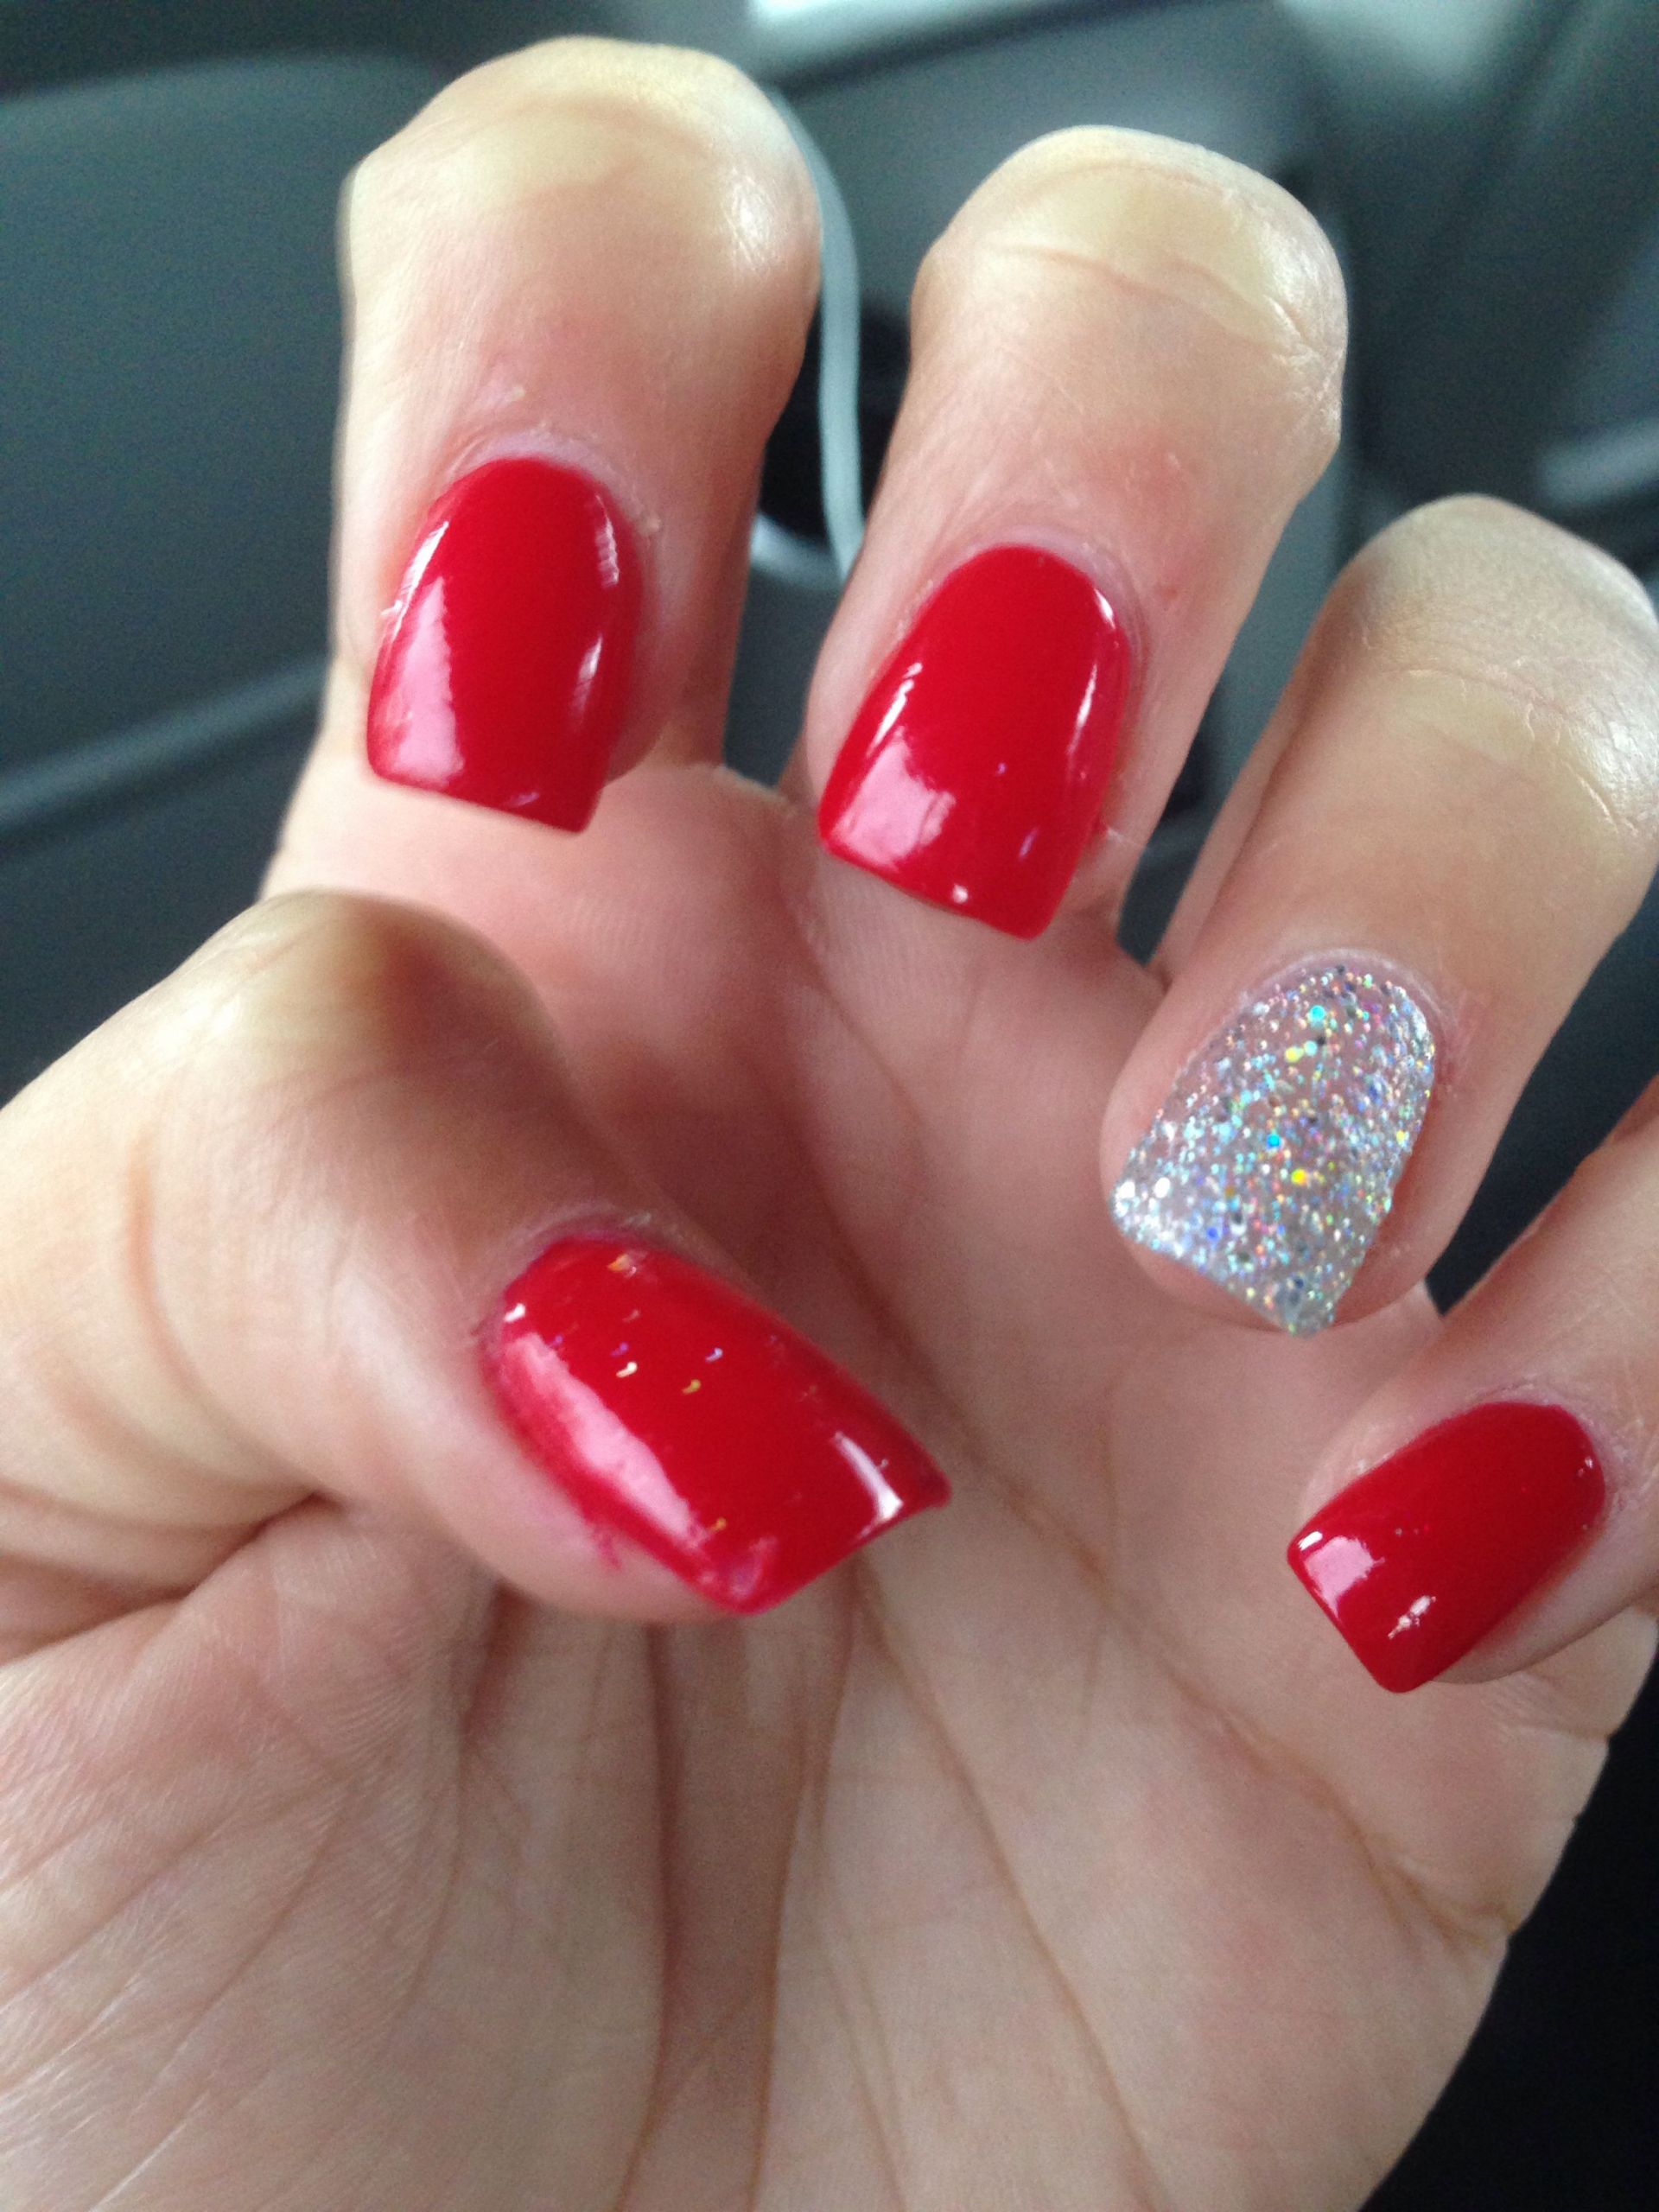 Red Nails With Glitter
 Acrylics Red with glitter nail on ring finger